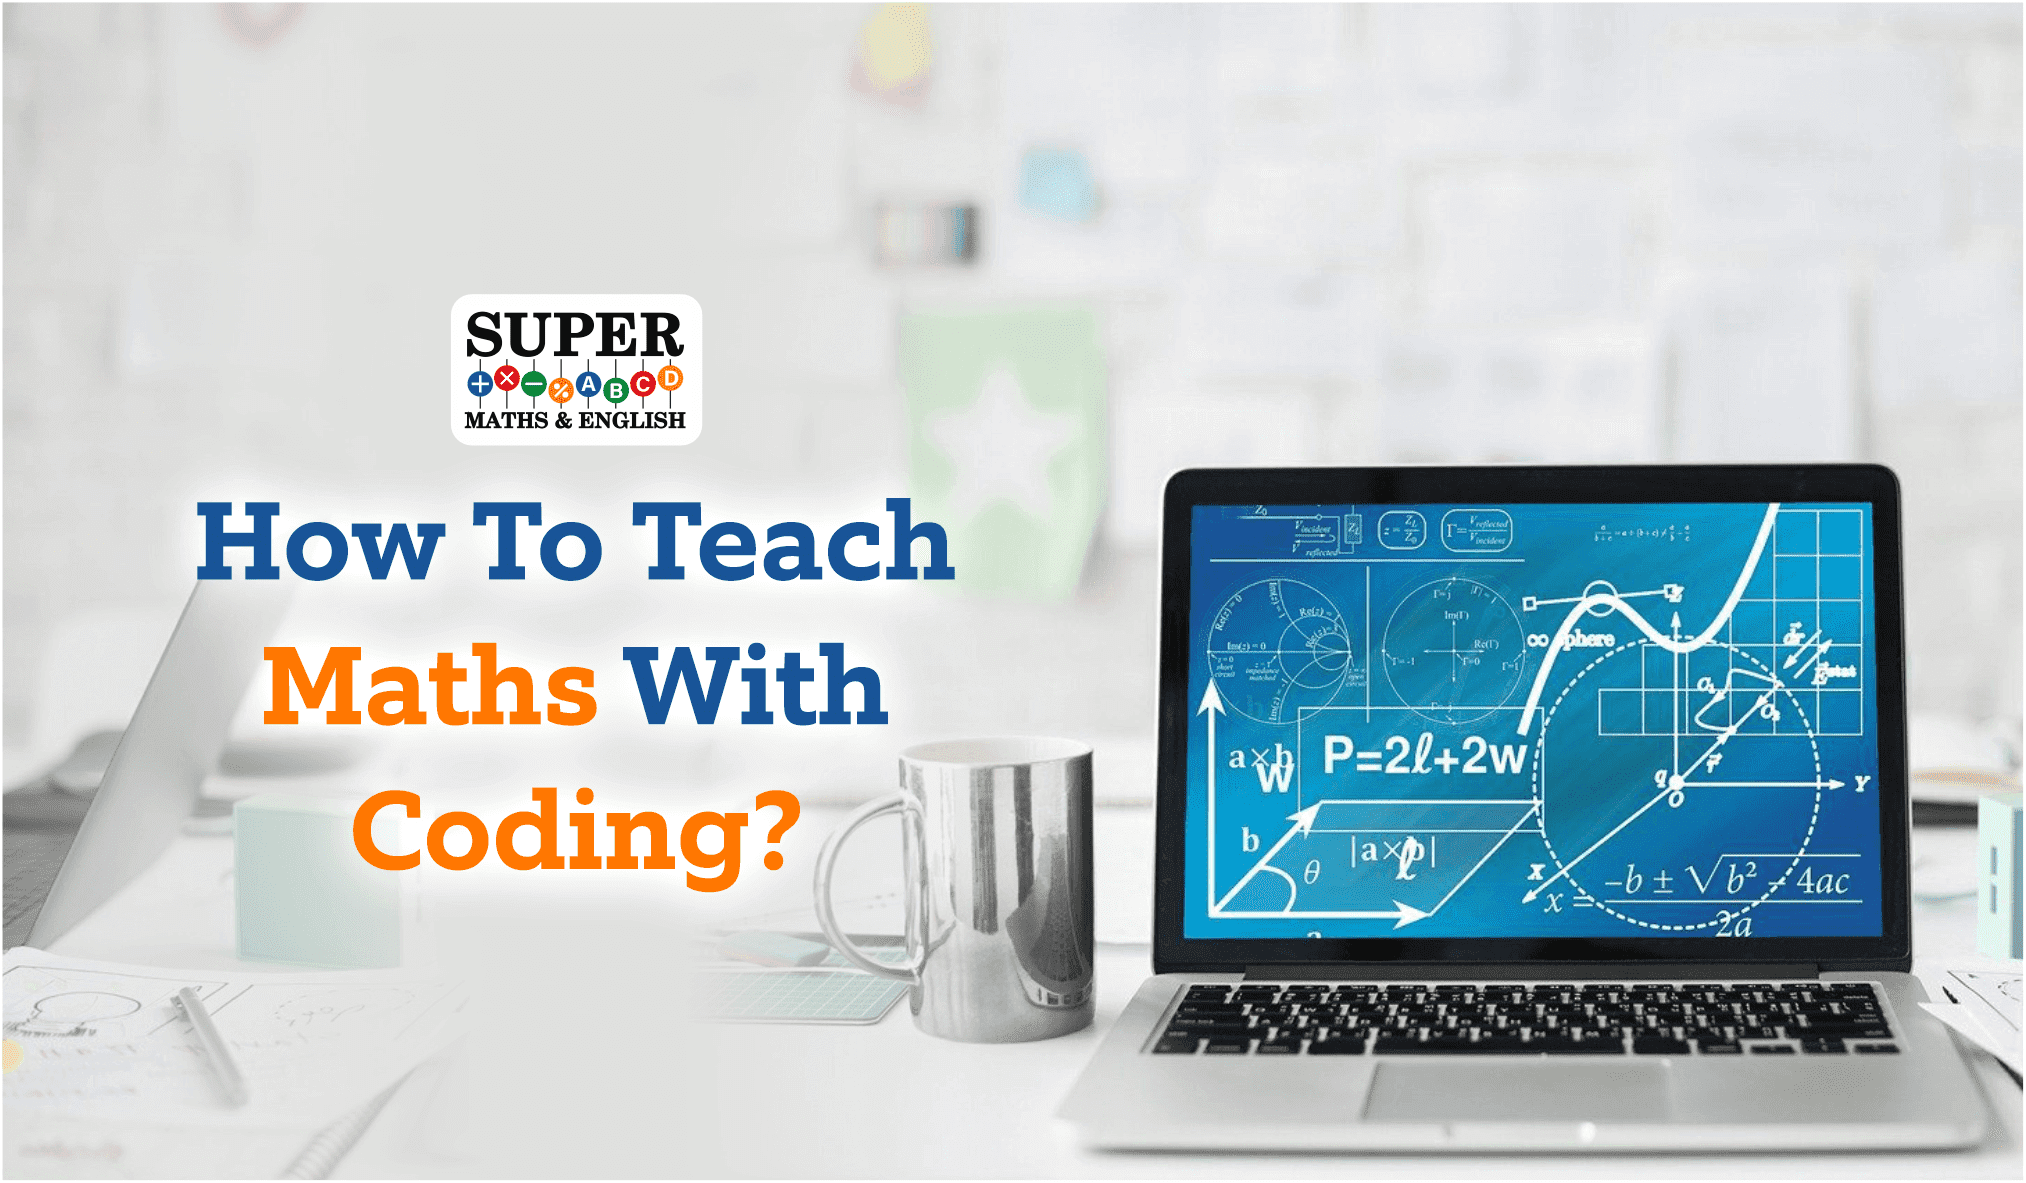 Maths with Coding | Supermaths